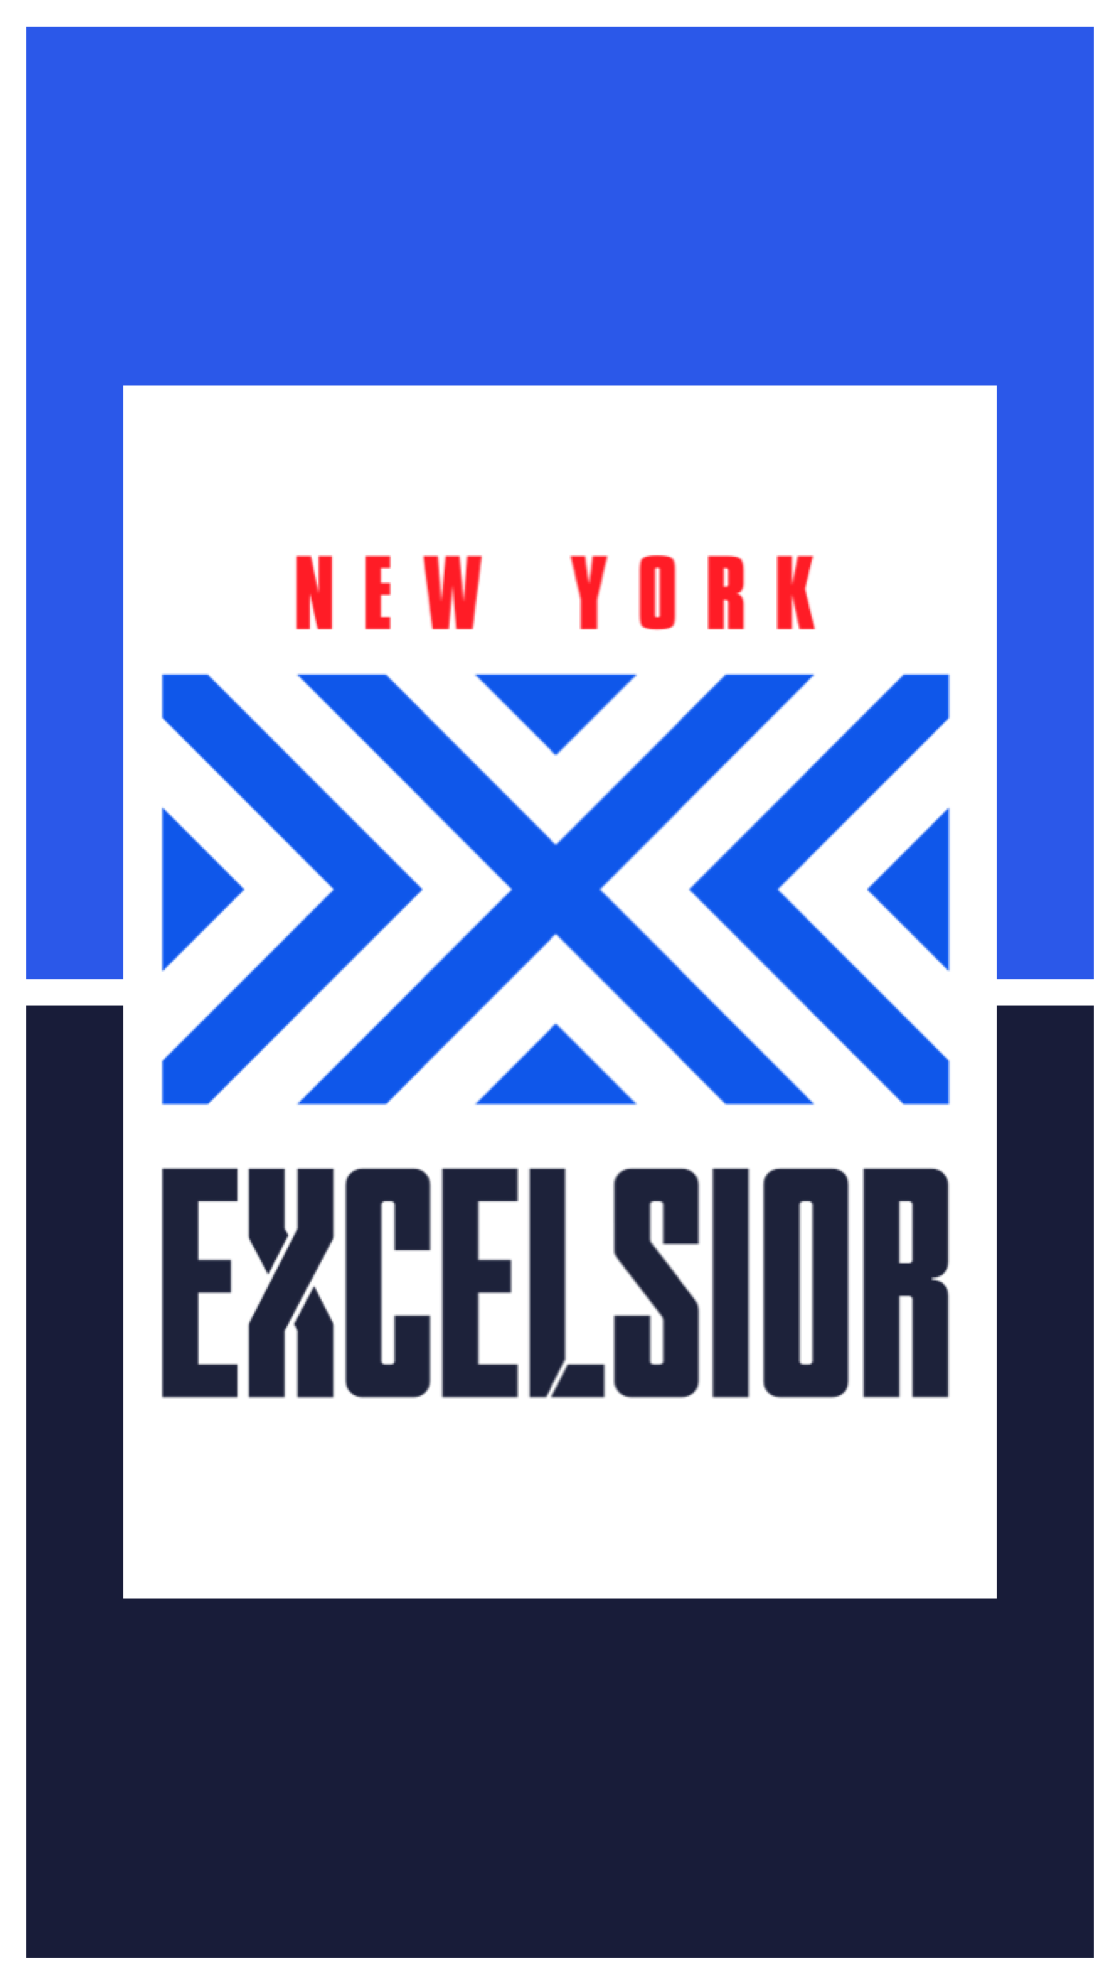 New York Excelsior. Overwatch, Excelsior, Gaming decor